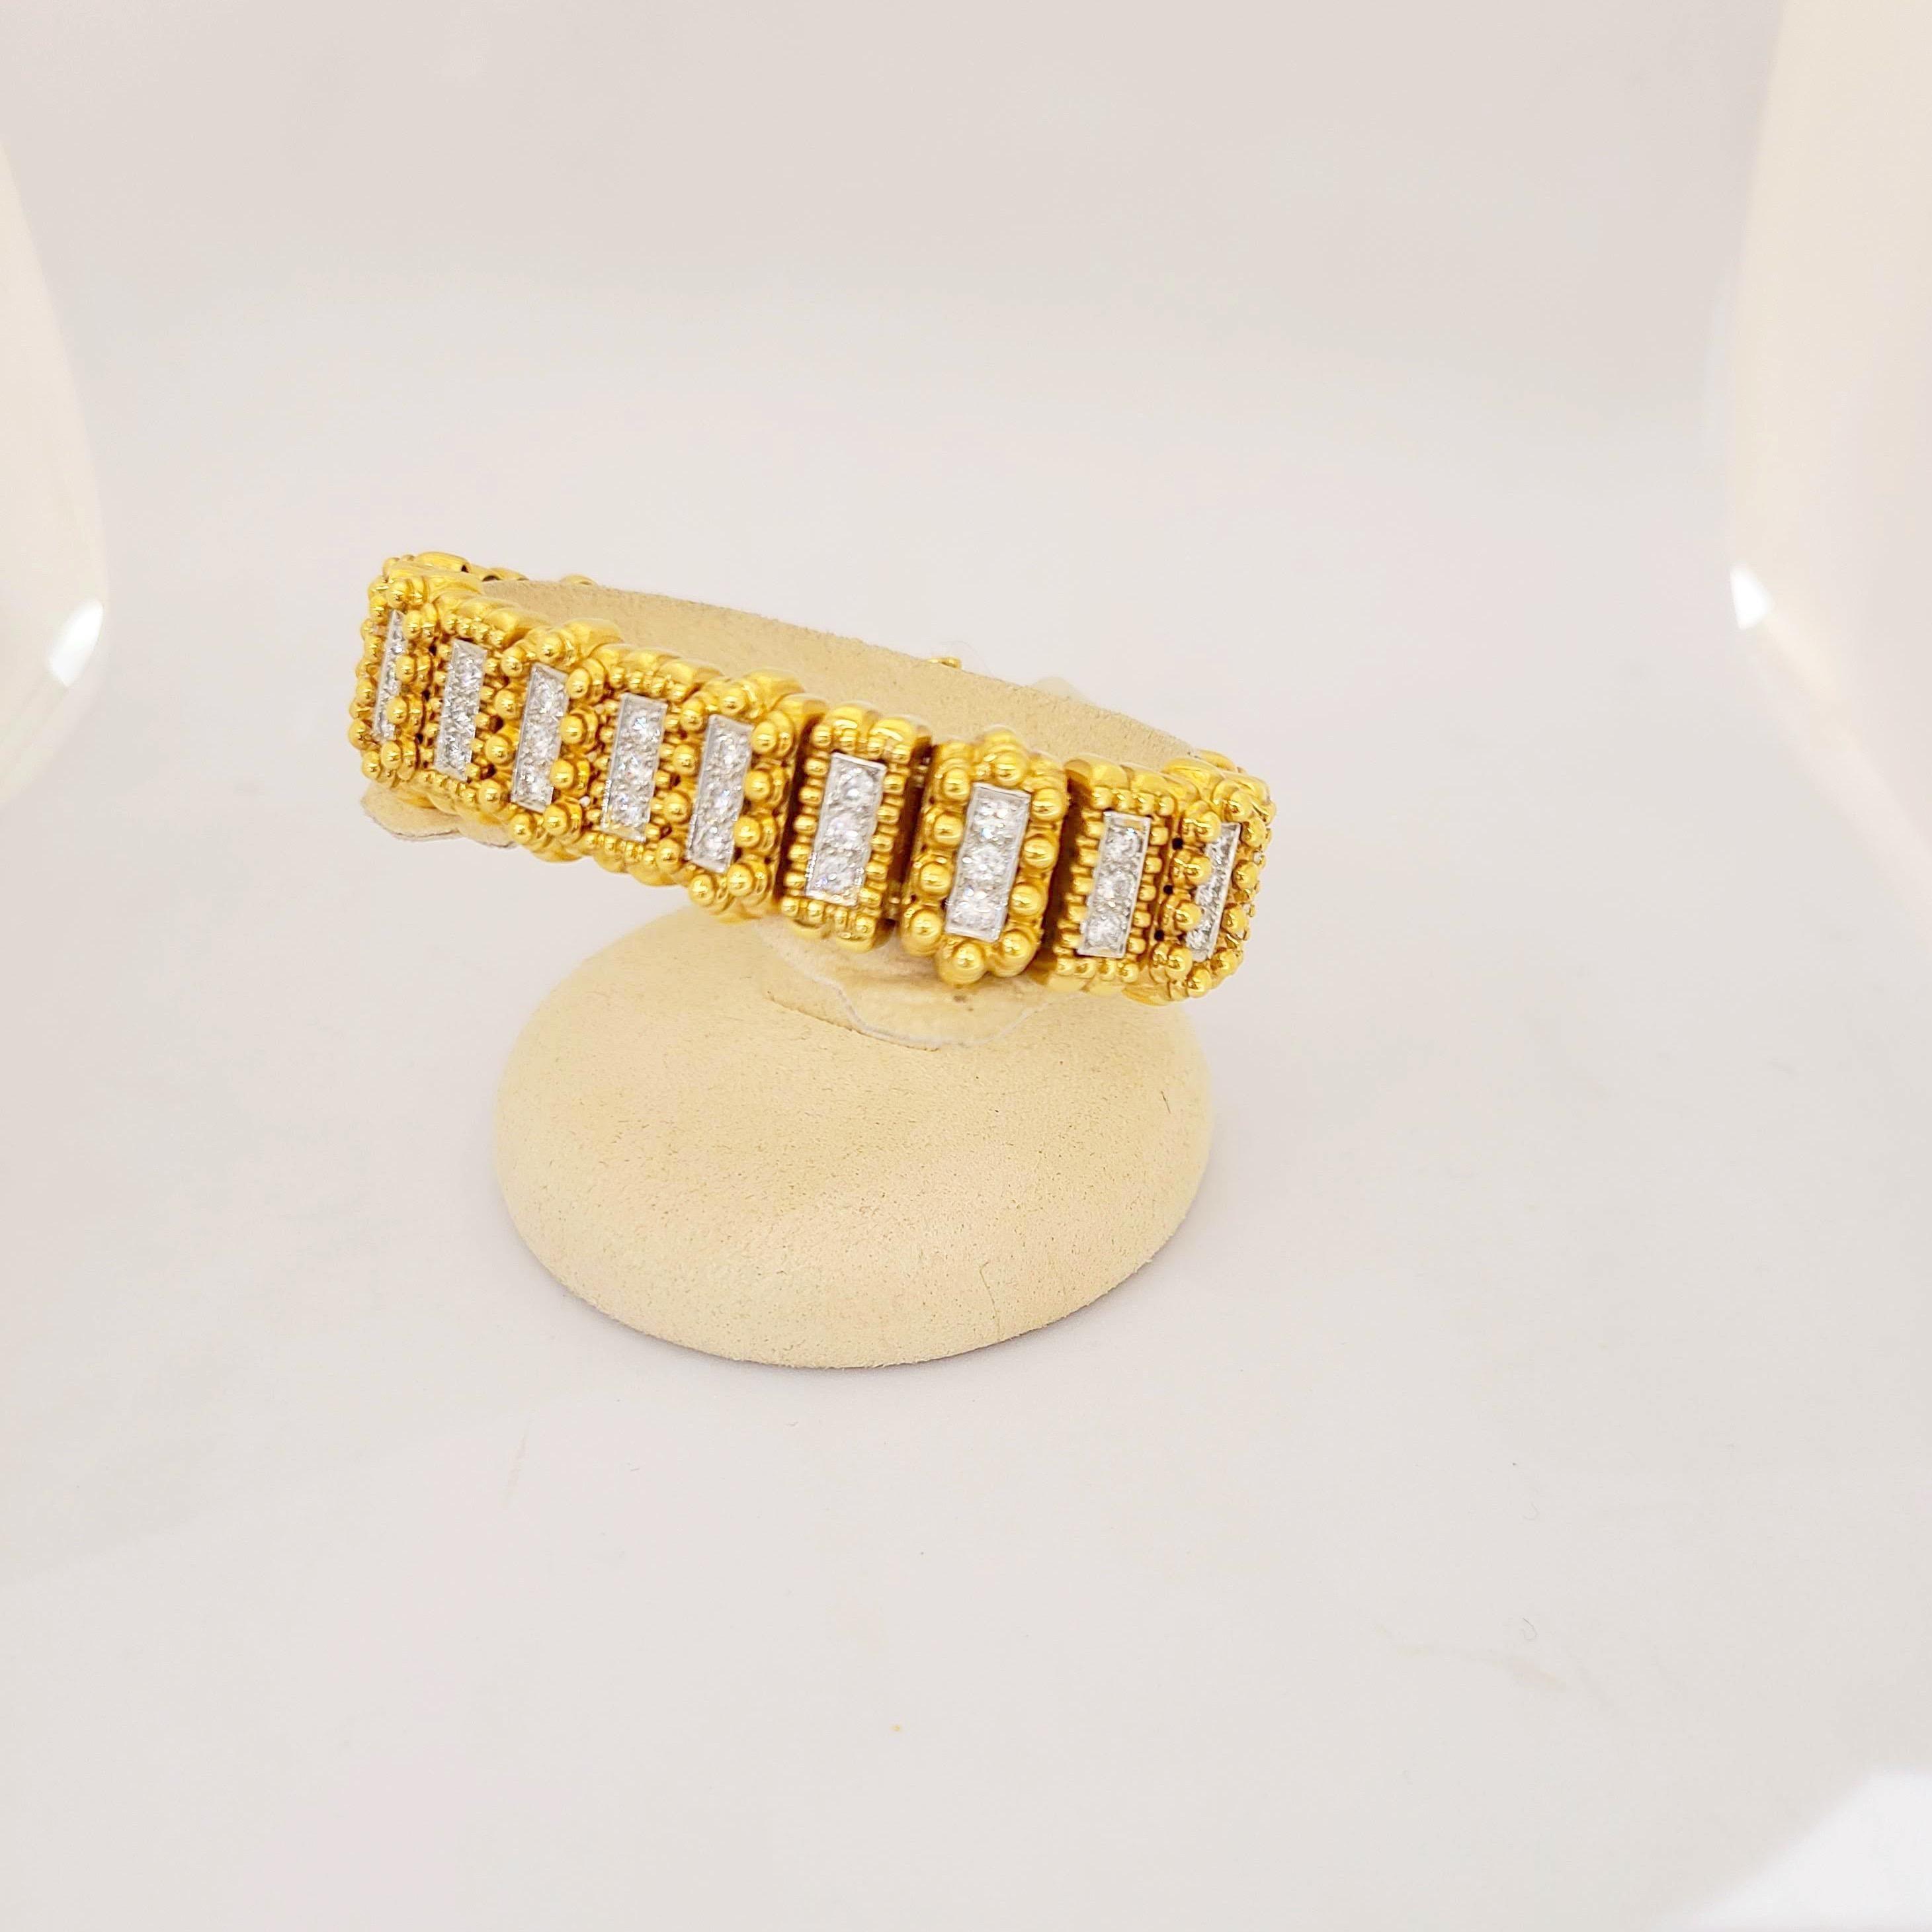 Chaavae 18 Karat and Platinum 4.50 Carat Diamond Bracelet In New Condition For Sale In New York, NY